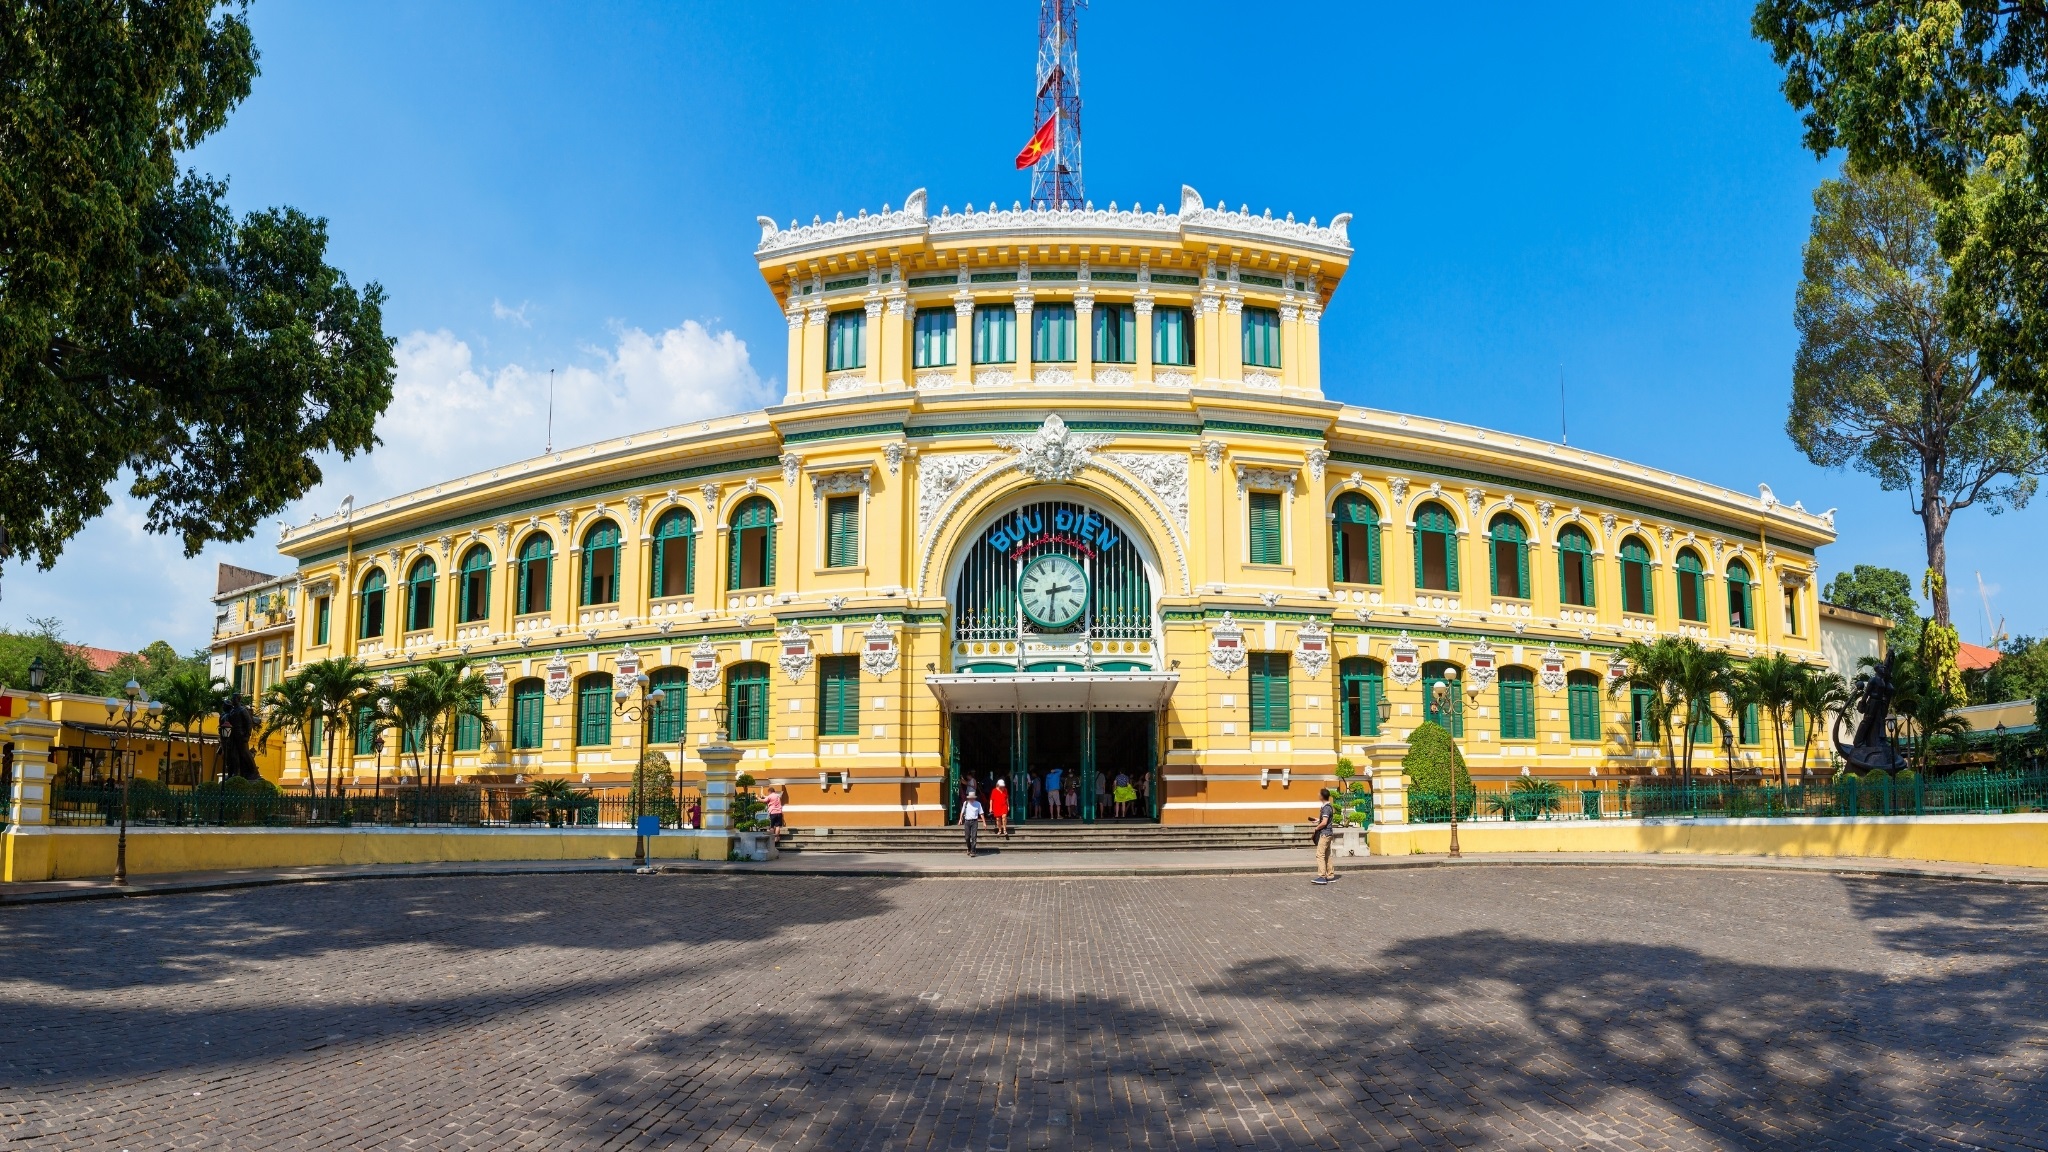 Saigon Central Post Office Stands Out As One Of The Most Iconic And Easily Recognizable Landmarks In Ho Chi Minh City